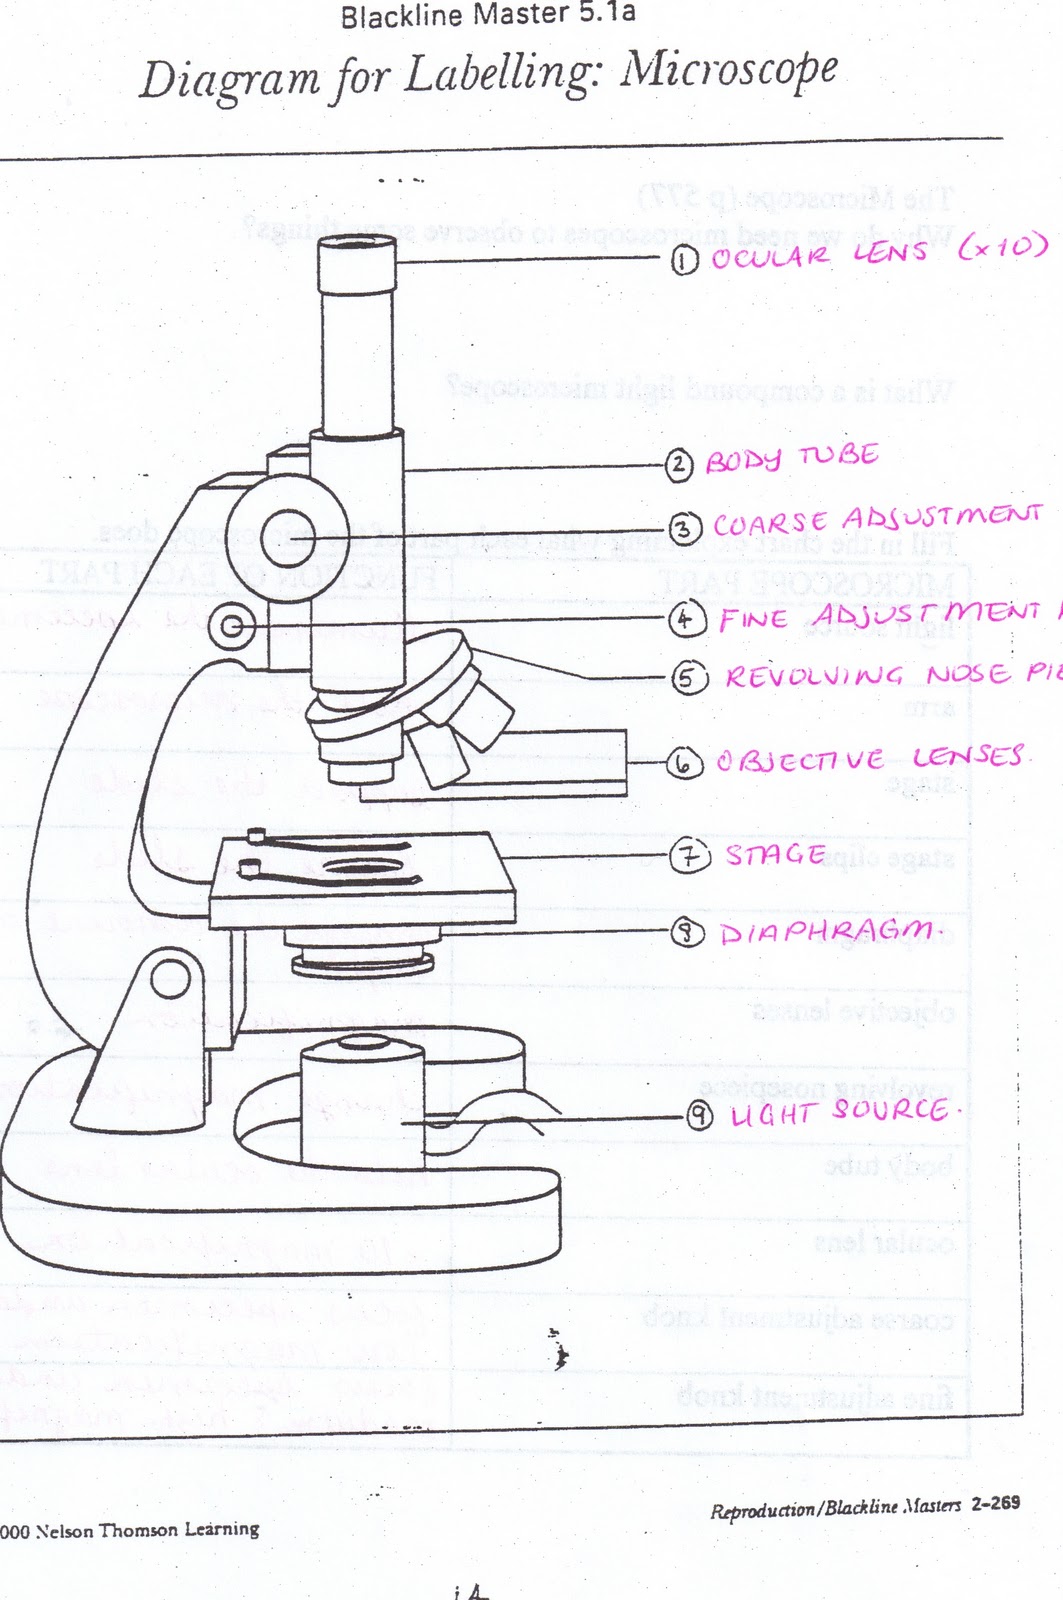 How to Draw a Microscope - VERY EASY - YouTube